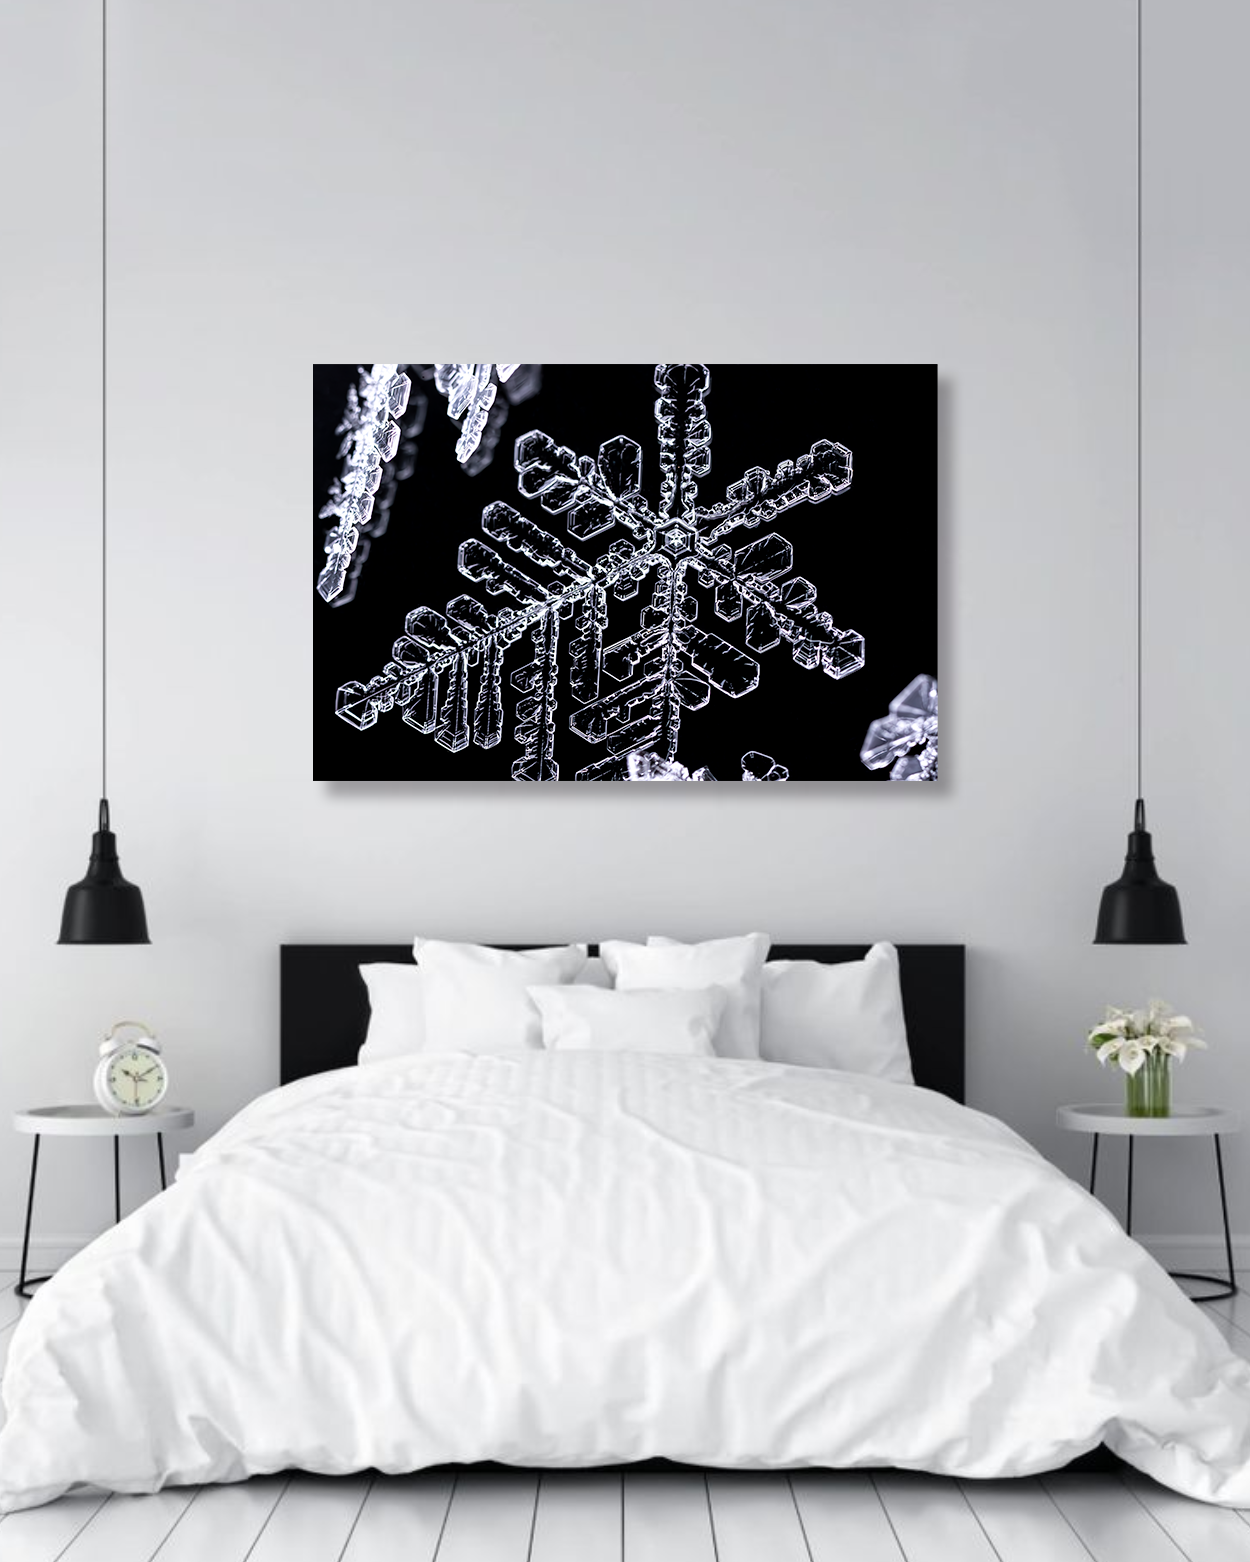 A large image of microscopic snowflakes hangs above a bed.